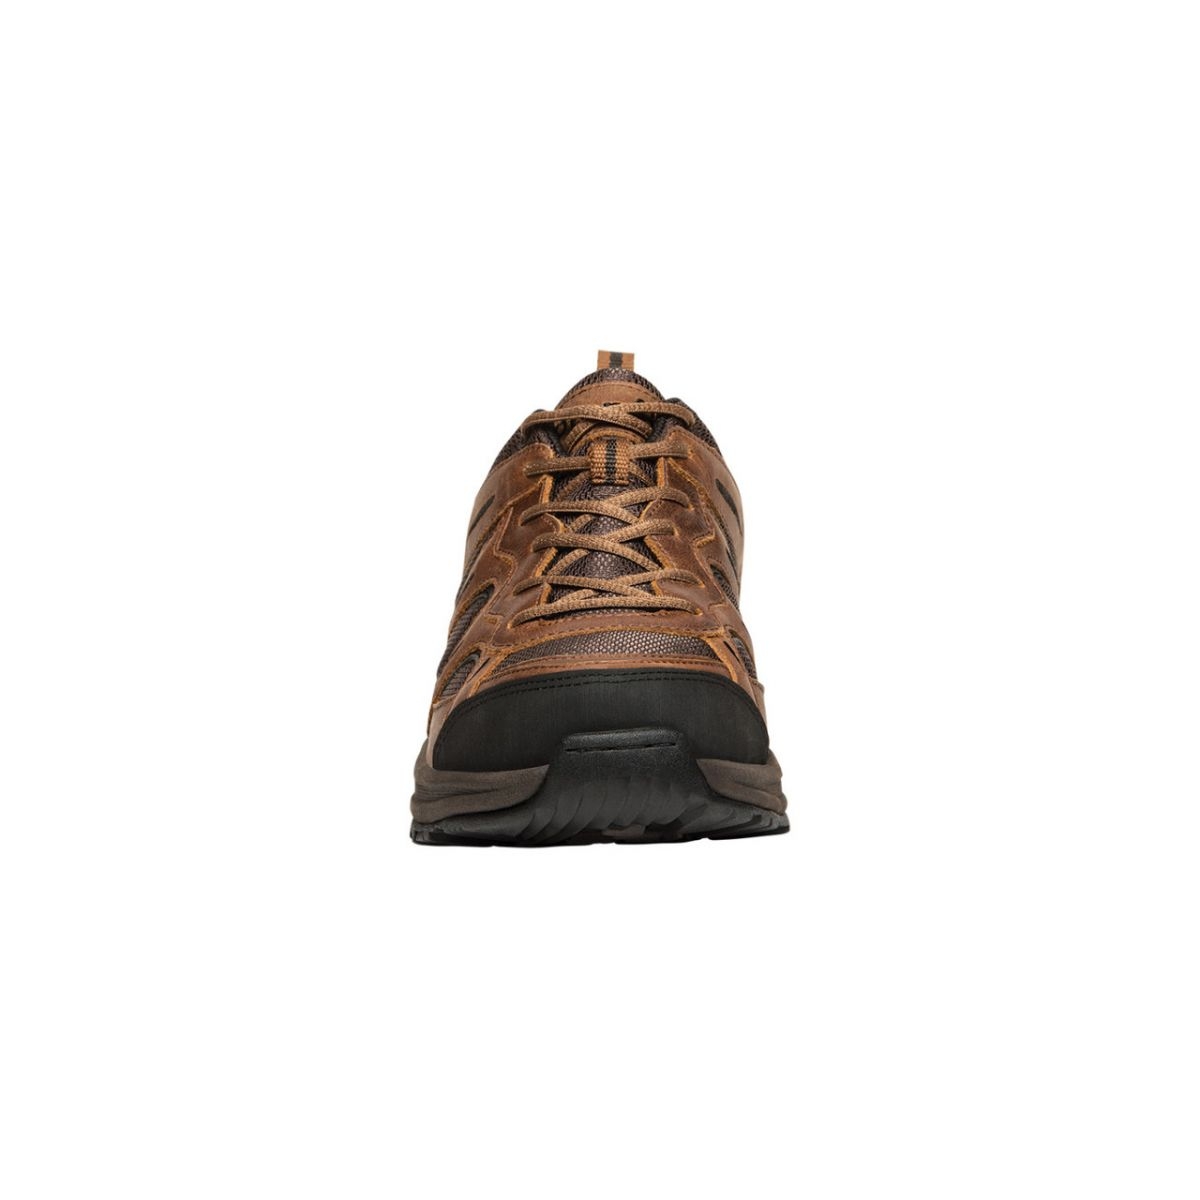 Propet Men's Connelly Hiking Shoe Brown - M5503BR BROWN - BROWN, 9-D